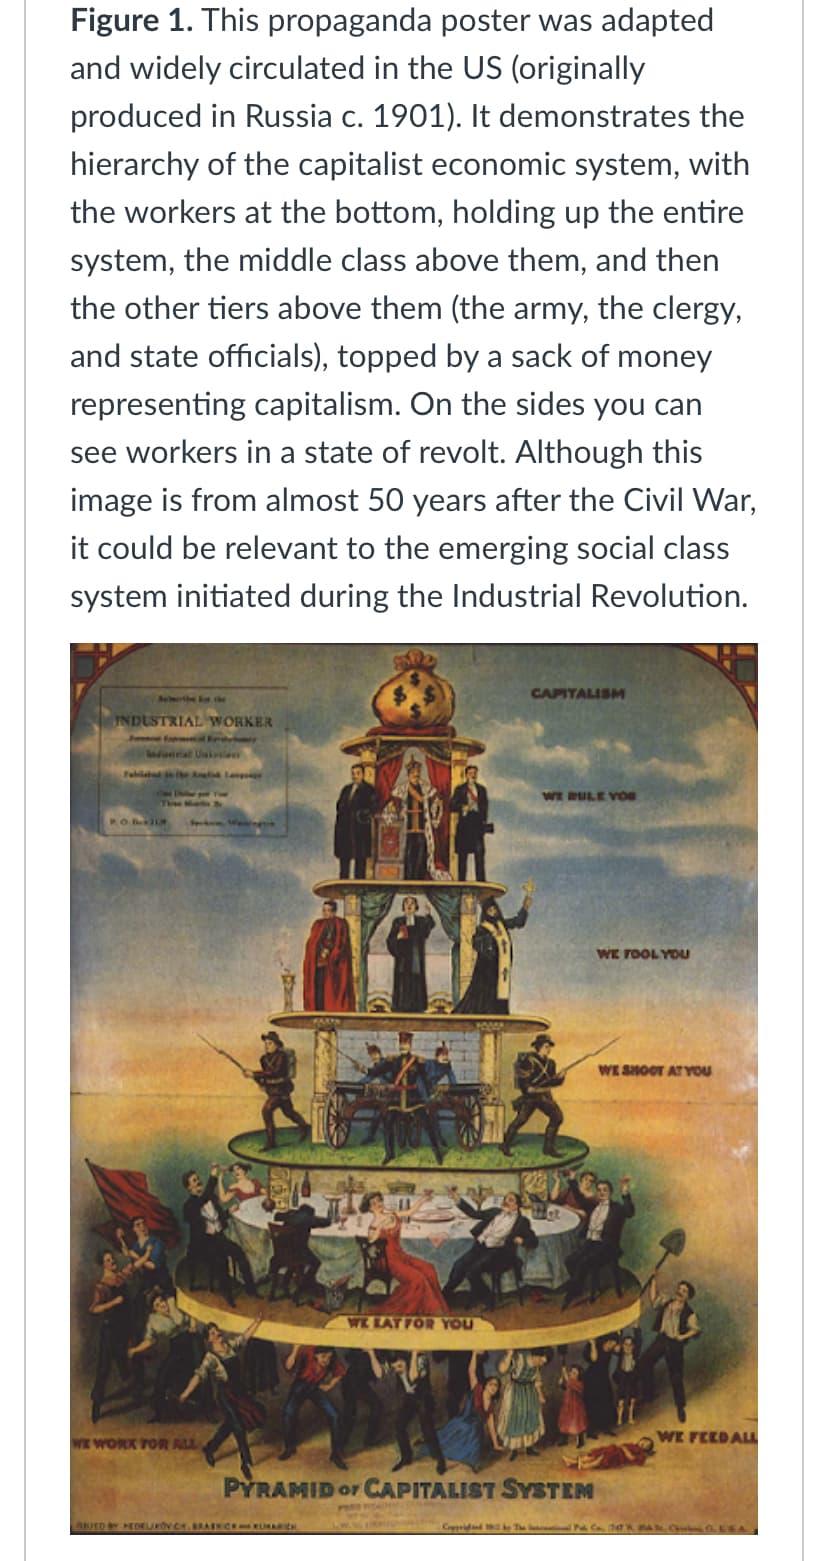 Figure 1. This propaganda poster was adapted
and widely circulated in the US (originally
produced in Russia c. 1901). It demonstrates the
hierarchy of the capitalist economic system, with
the workers at the bottom, holding up the entire
system, the middle class above them, and then
the other tiers above them (the army, the clergy,
and state officials), topped by a sack of money
representing capitalism. On the sides you can
see workers in a state of revolt. Although this
image is from almost 50 years after the Civil War,
it could be relevant to the emerging social class
system initiated during the Industrial Revolution.
Bewerbe for the
INDUSTRIAL WORKER
Published in the old Lange
The Met
P.O. Box 19
WE WORK FOR ALL
B
ABIED BY HEDELIKOVCT. BRASKICE KUMARICH
WE EAT FOR YOU
POMMA
KW.NG HASZON
CAPITALISM
PYRAMID or CAPITALIST SYSTEM
WE RULE YOU
Copped by The national Pa
WE FOOL YOU
WE SHOOT AT YOU
WE FEED ALL
Chickens, O. LEA